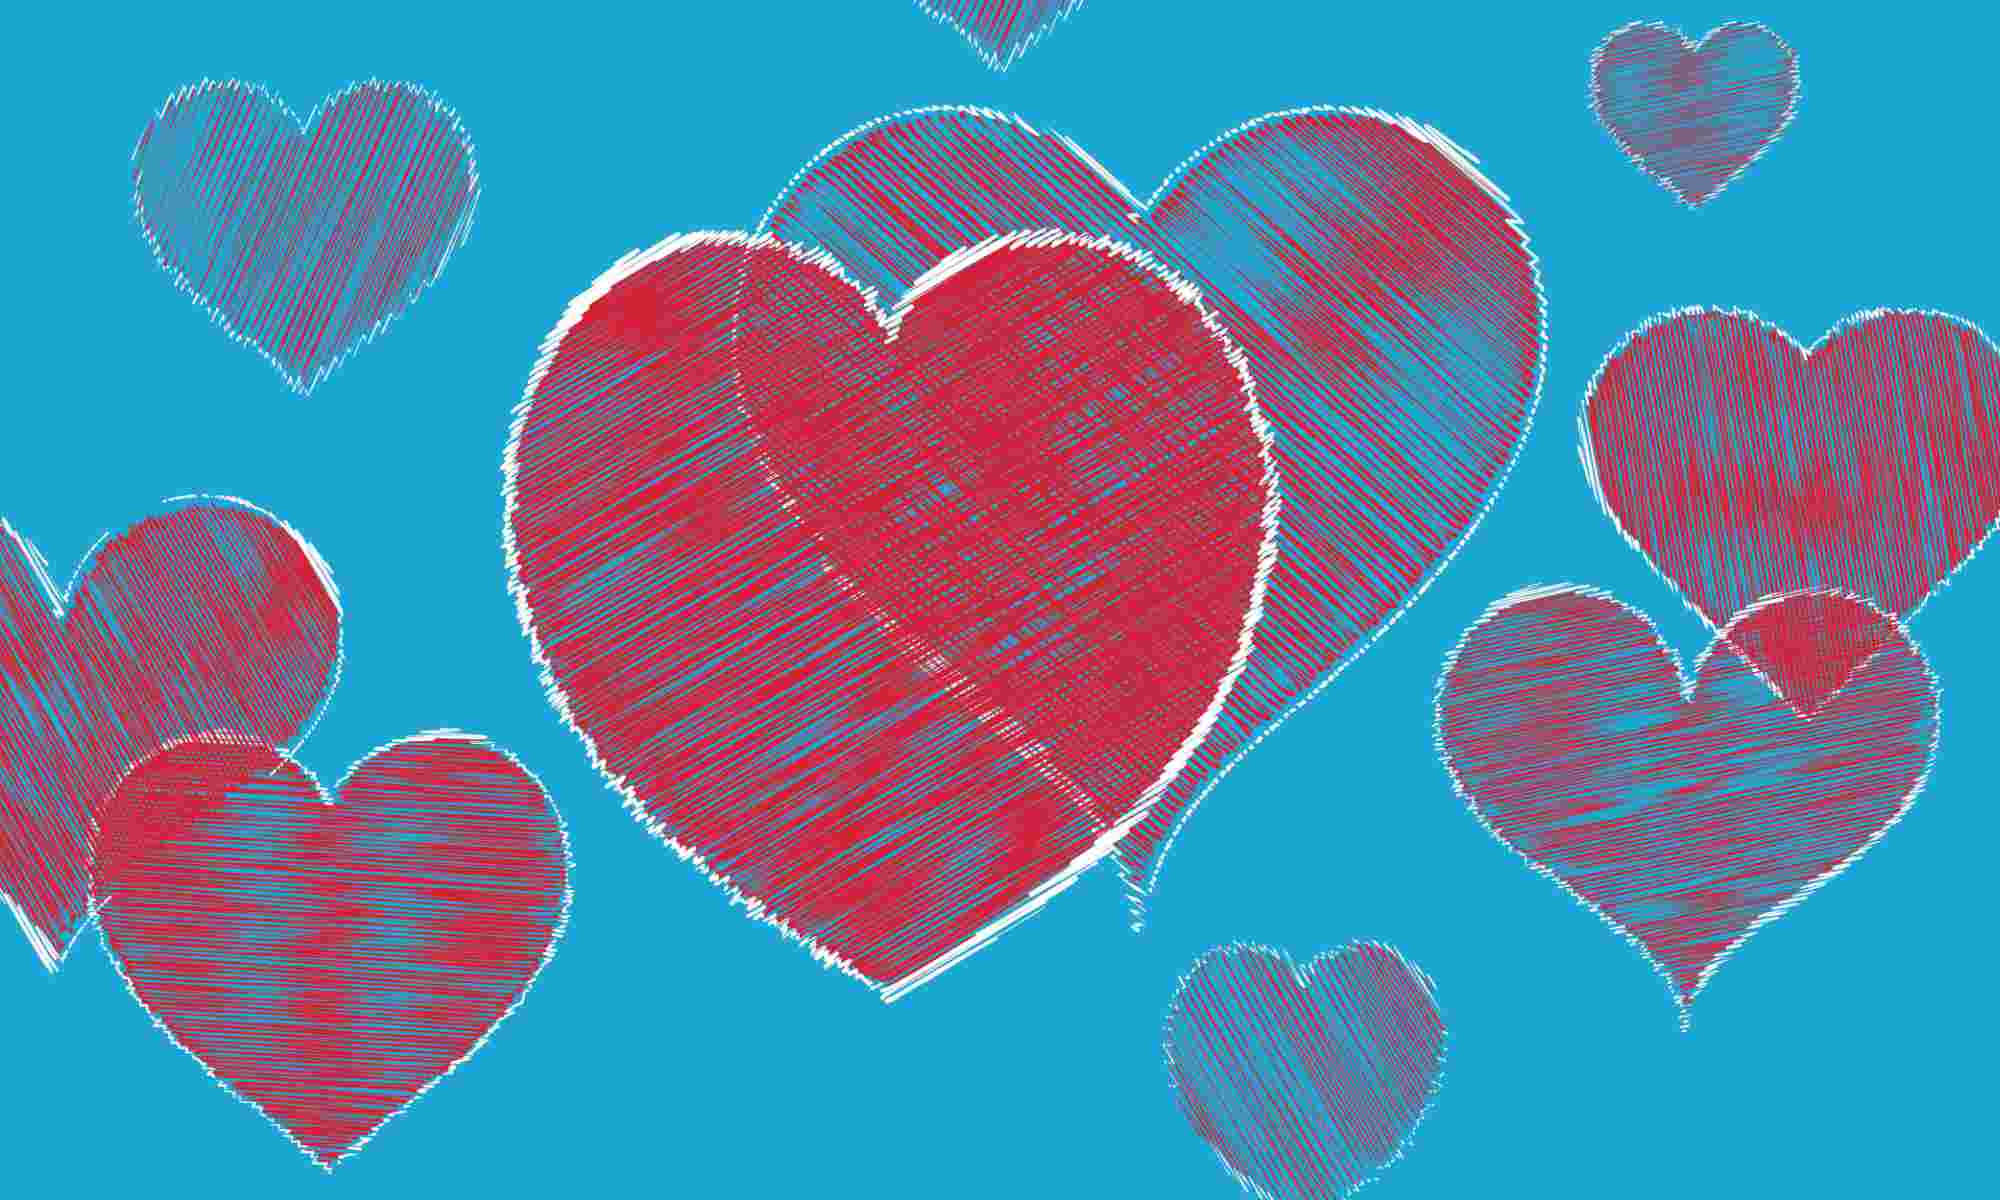 Two hand drawn hearts overlapped surrounded by other hearts against a blue background. 